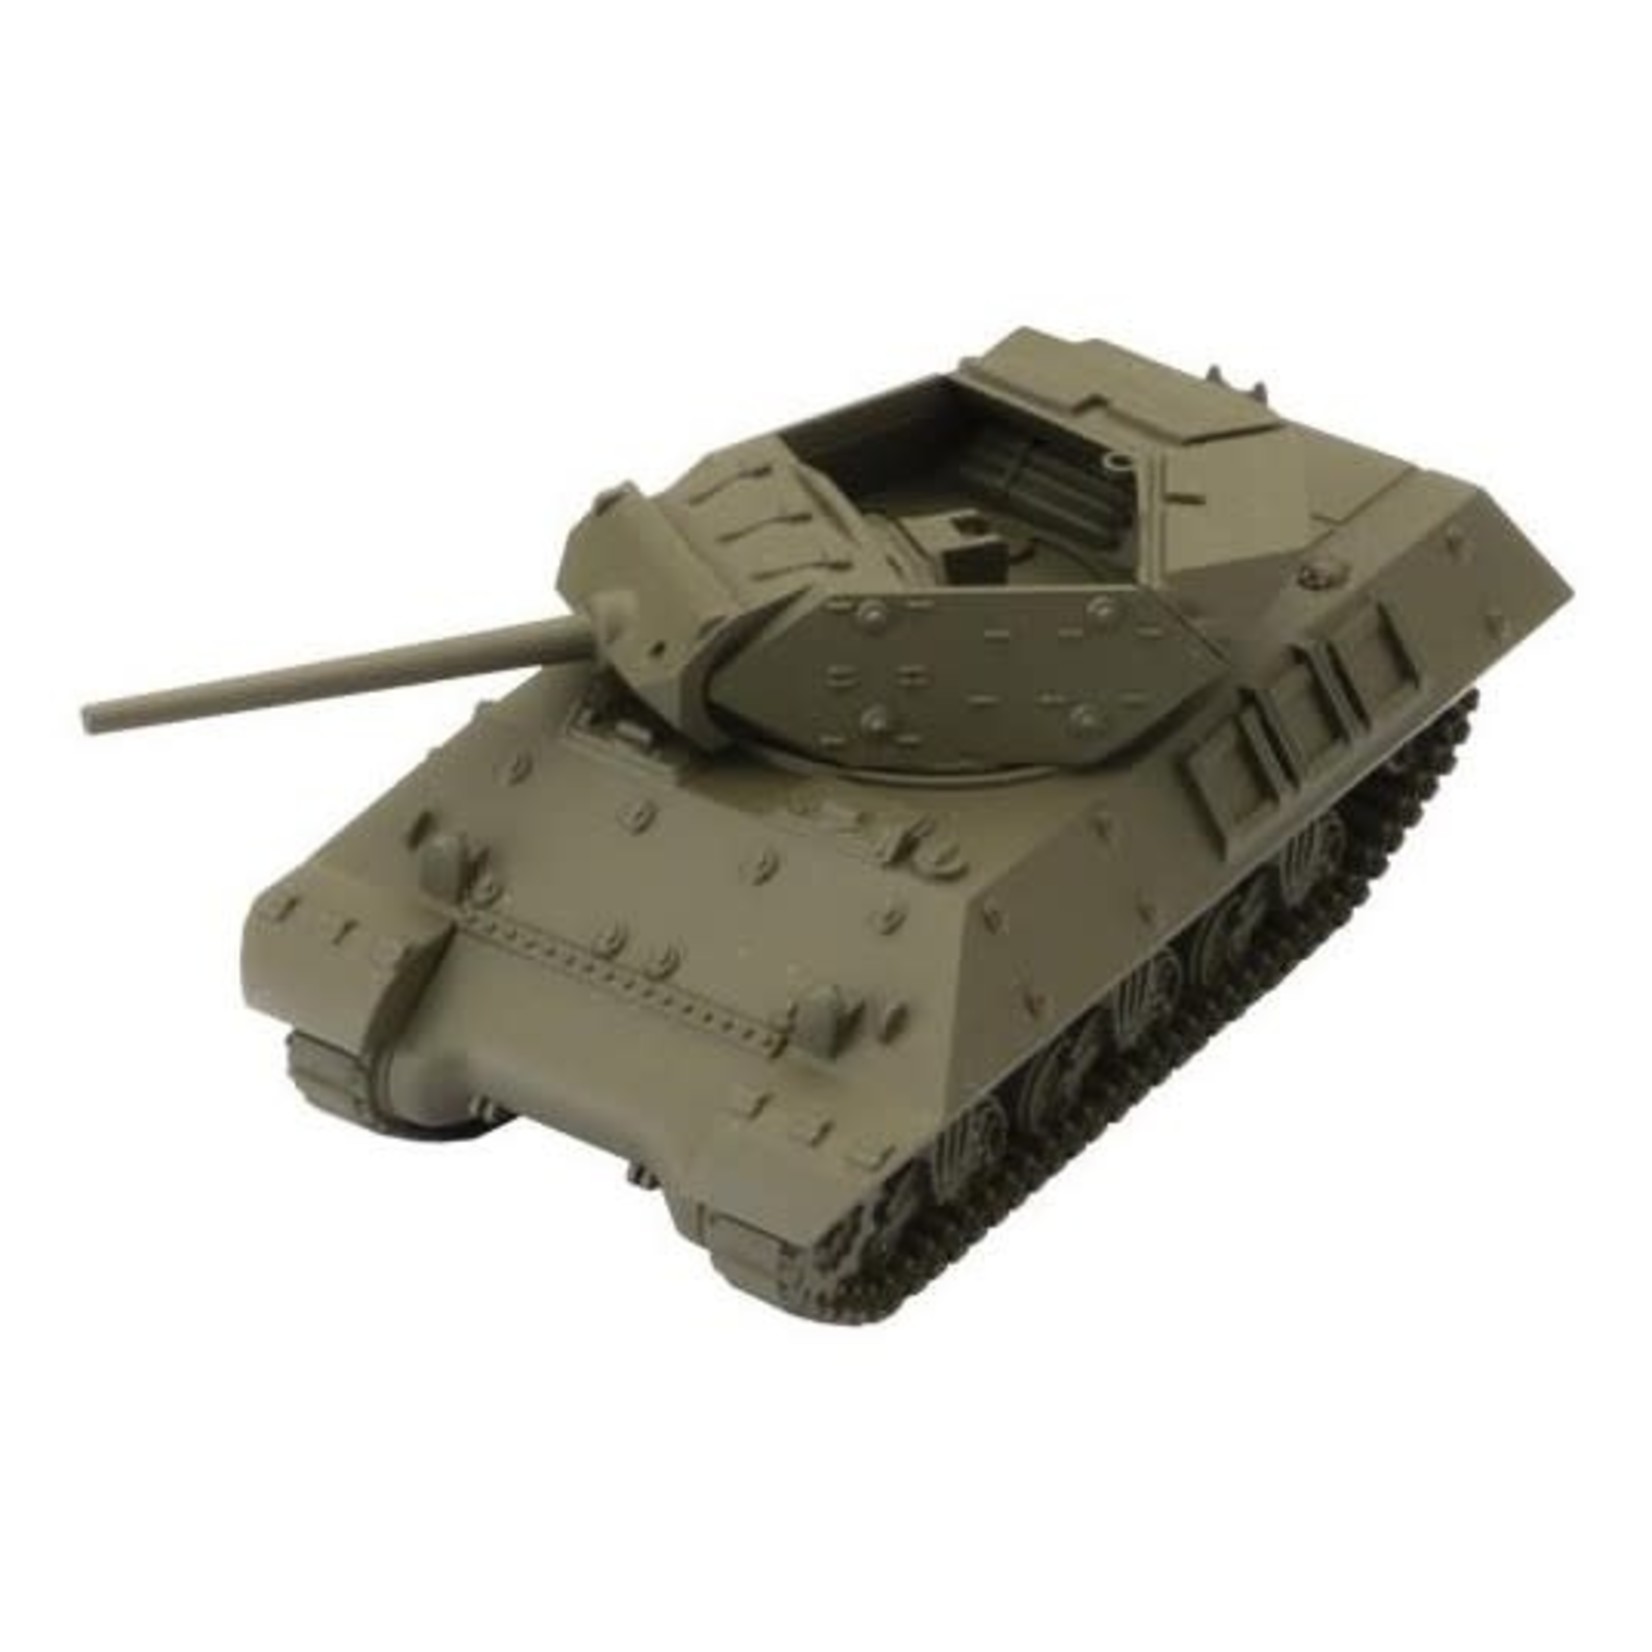 Gale Force 9 World of Tanks American M10 Wolverine